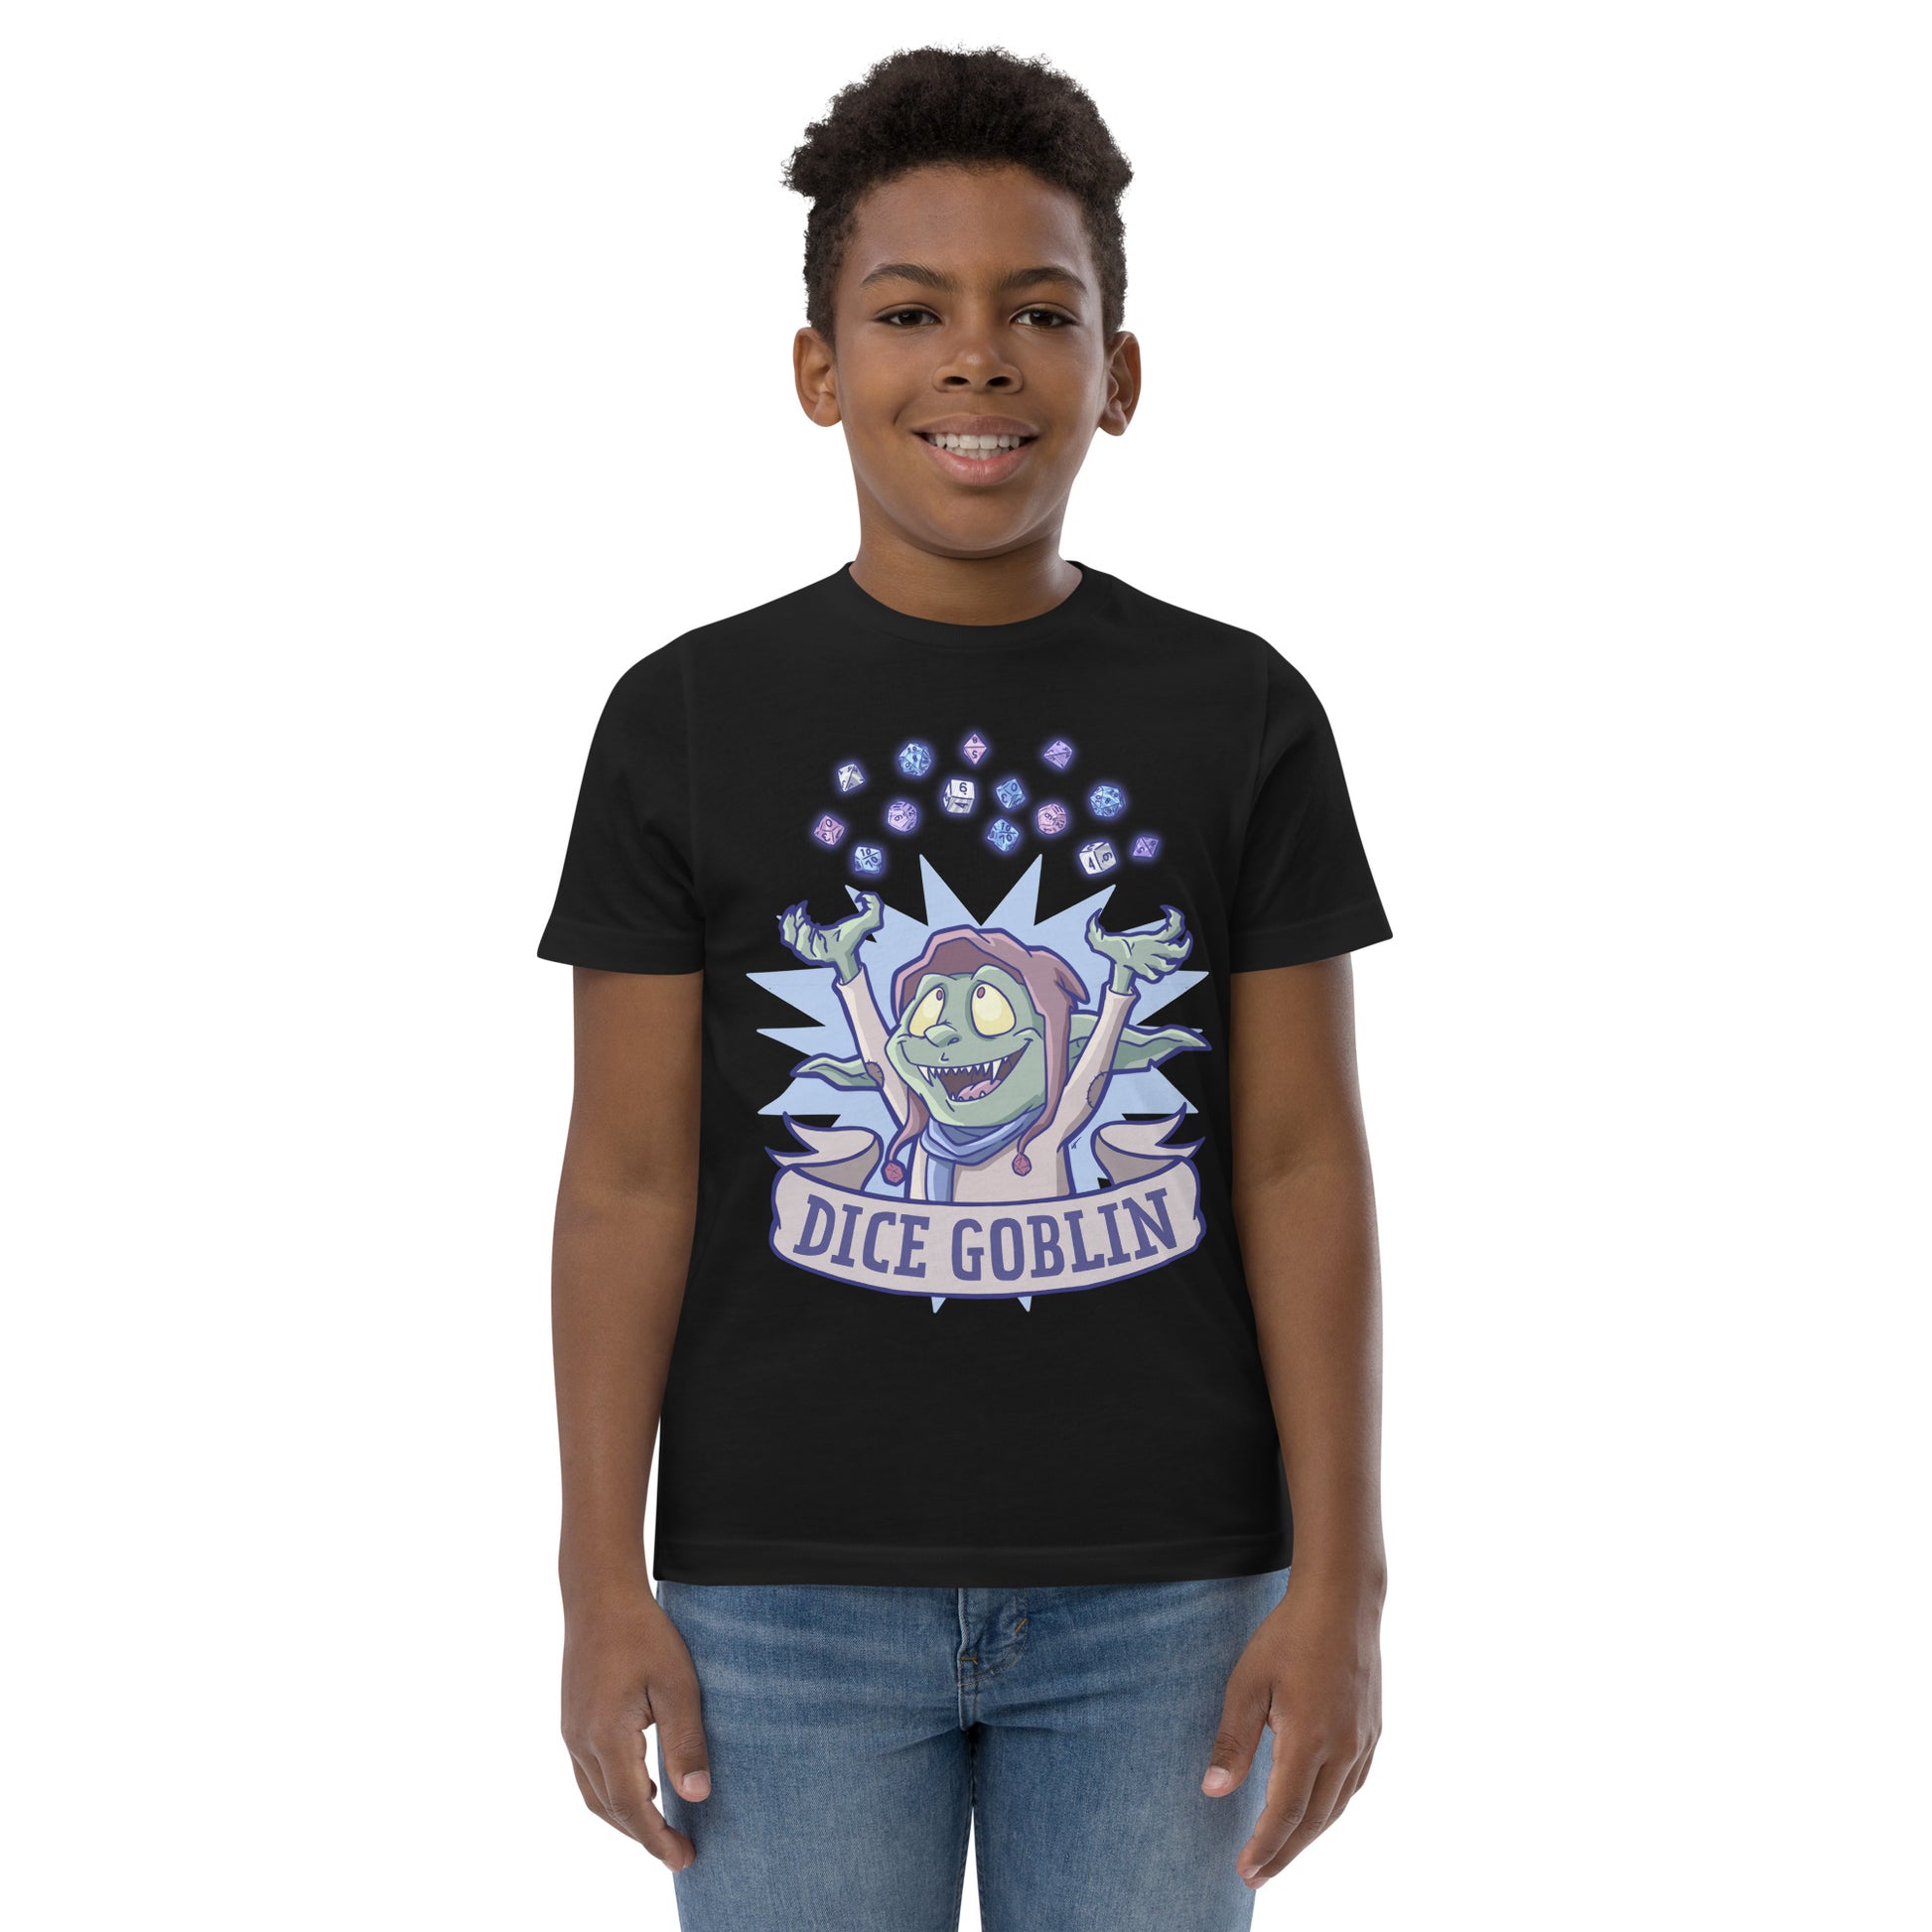 Dice Goblin Youth t-shirt  Level 1 Gamers Black XS 